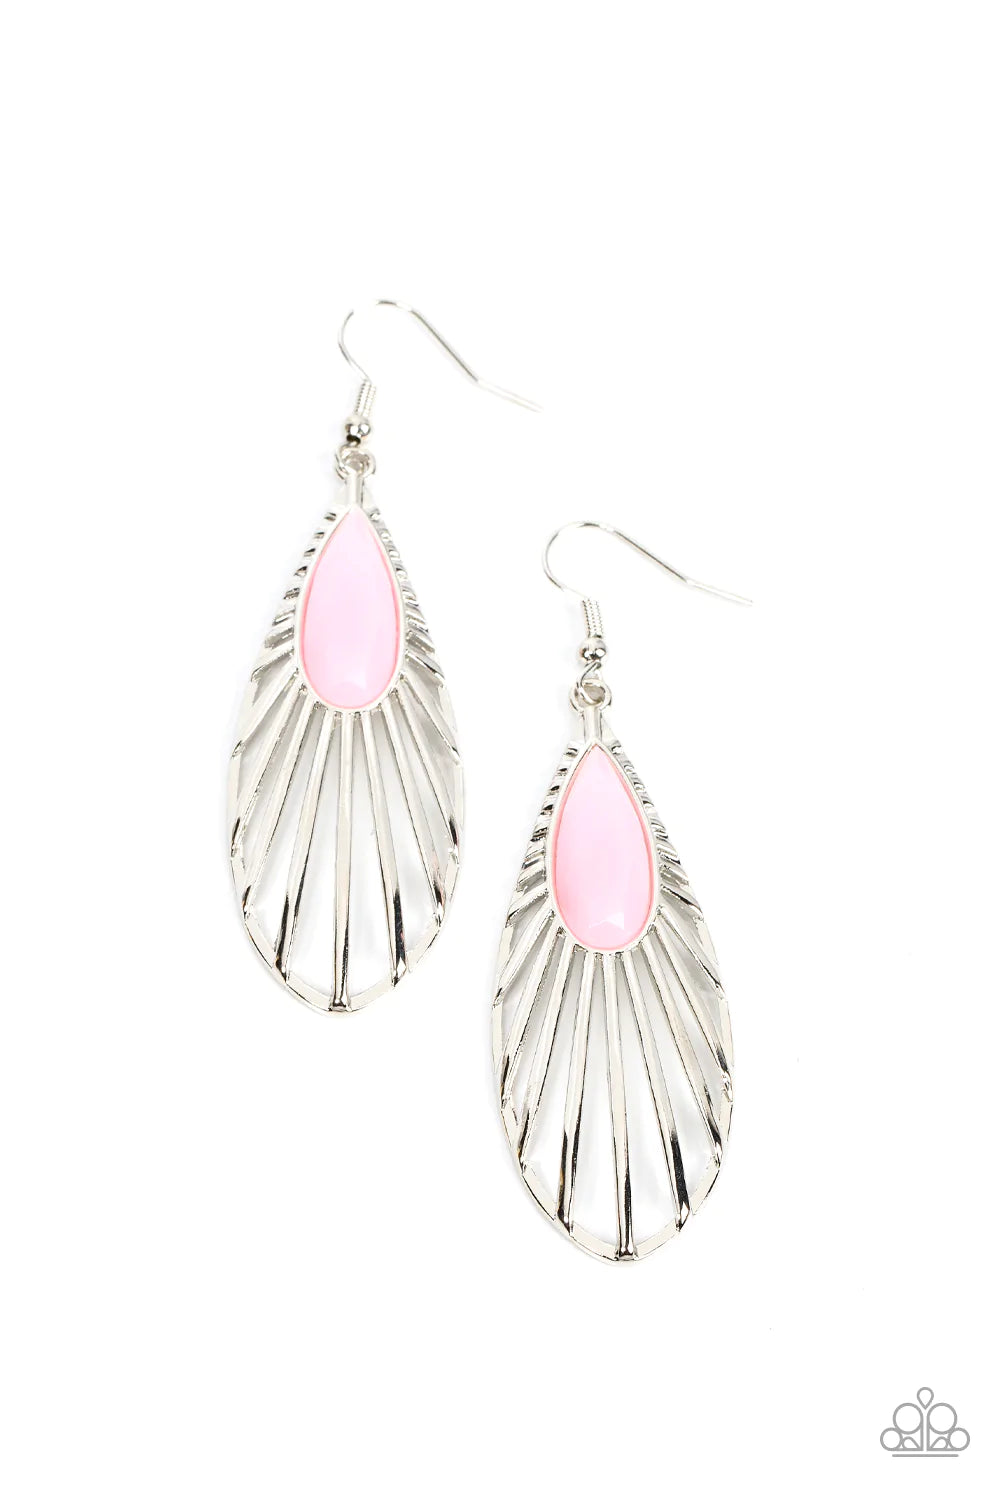 Paparazzi Accessories WING-A-Ding-Ding - Pink Reminiscent of a butterfly wing, shiny silver bars flare out from an opaque Pale Rosette teardrop bead and delicately connect into a whimsical frame. Earring attaches to a standard fishhook fitting. Jewelry